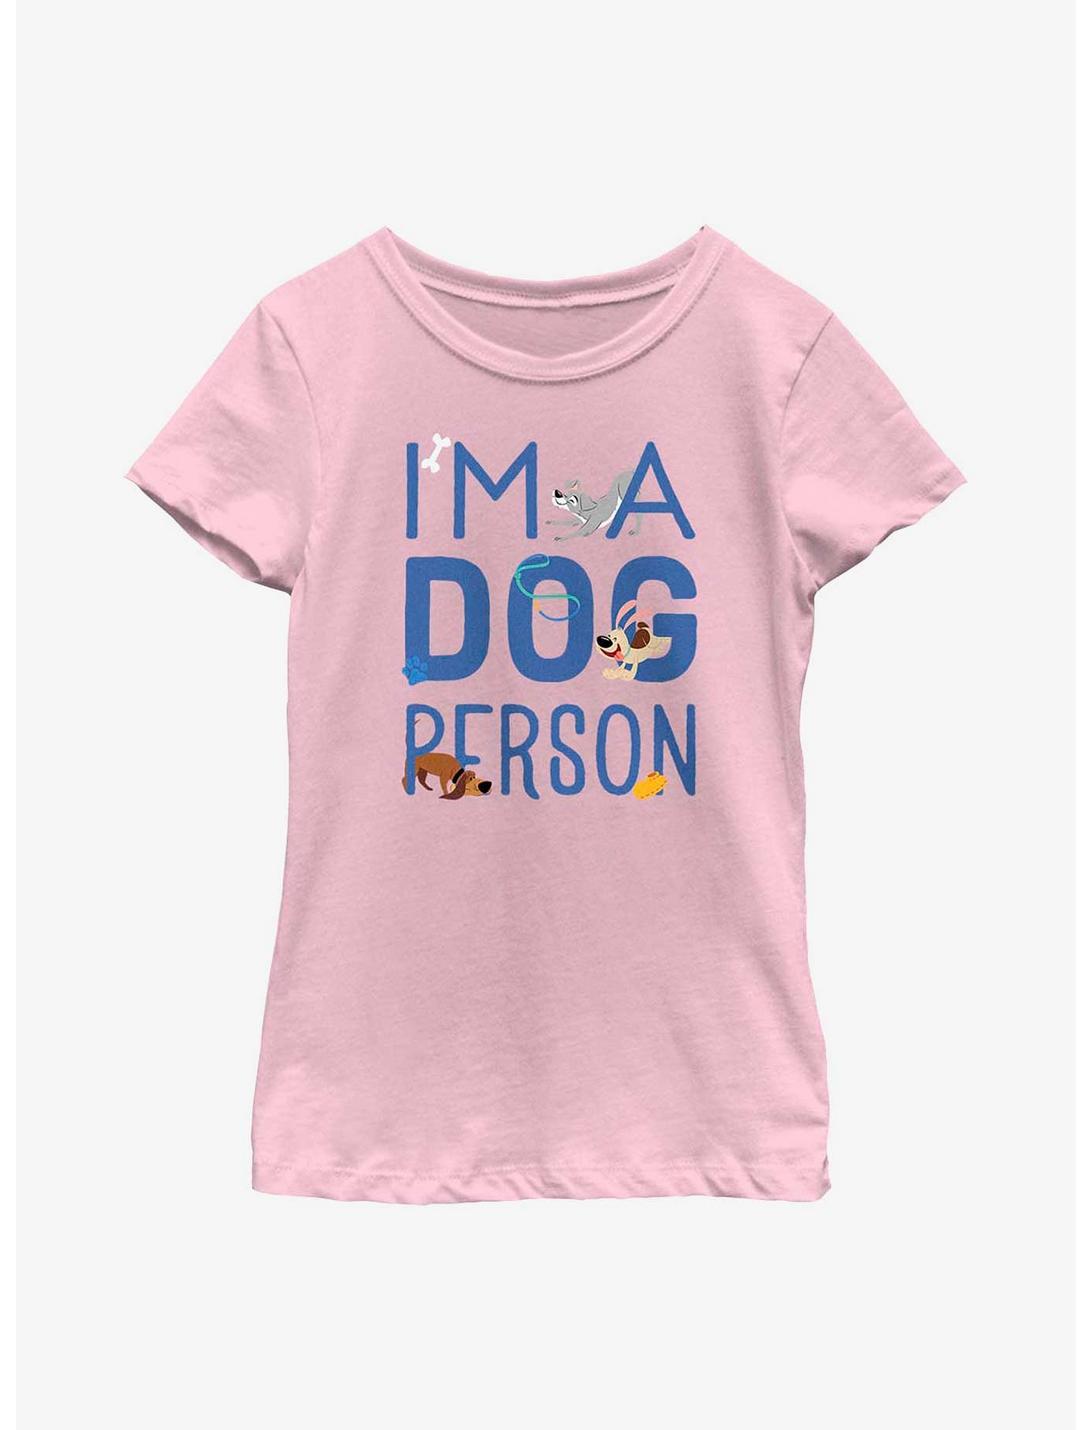 Disney Channel Dog Person Youth Girls T-Shirt, PINK, hi-res